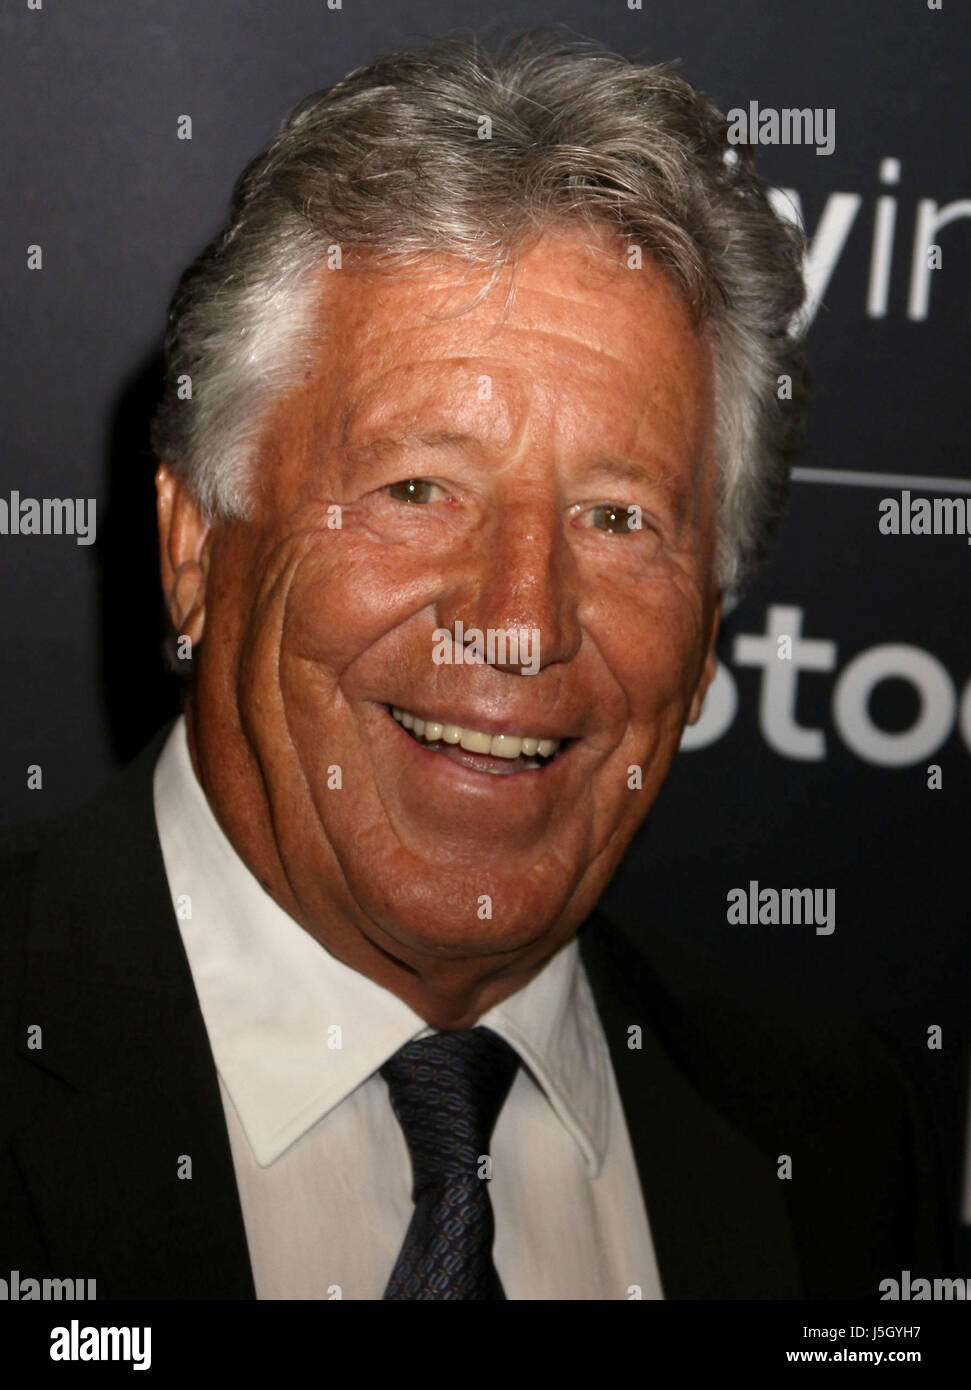 New York, New York, USA. 16th May, 2017. Former racing driver MARIO ANDRETTI attends the 2017 Clio Sports Awards, where he received The Stuart Scott Lifetime Achievement Award held at Capitale. Credit: Nancy Kaszerman/ZUMA Wire/Alamy Live News Stock Photo